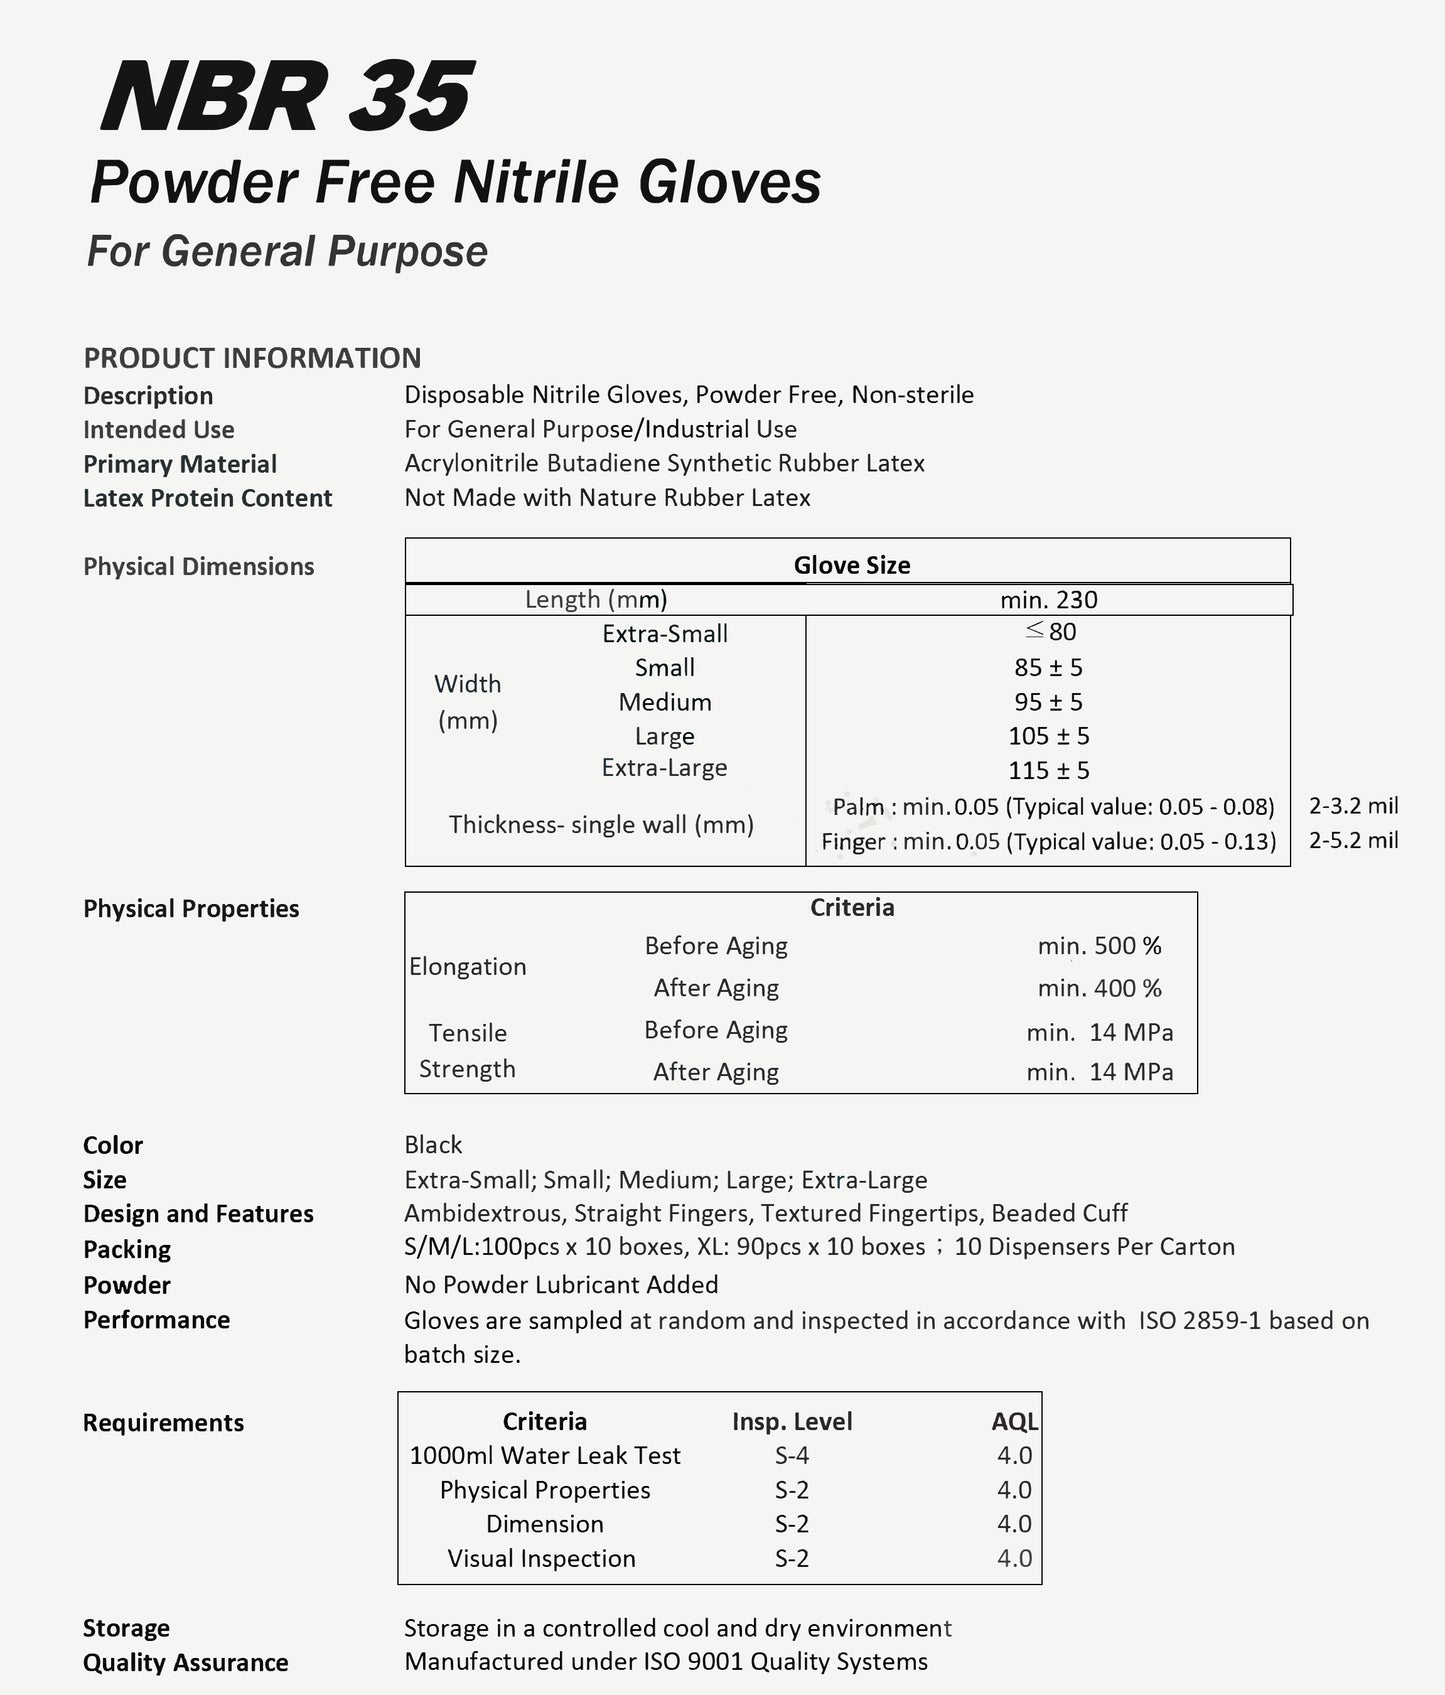 NBR powder free nitrile examination gloves details for general purpose use.